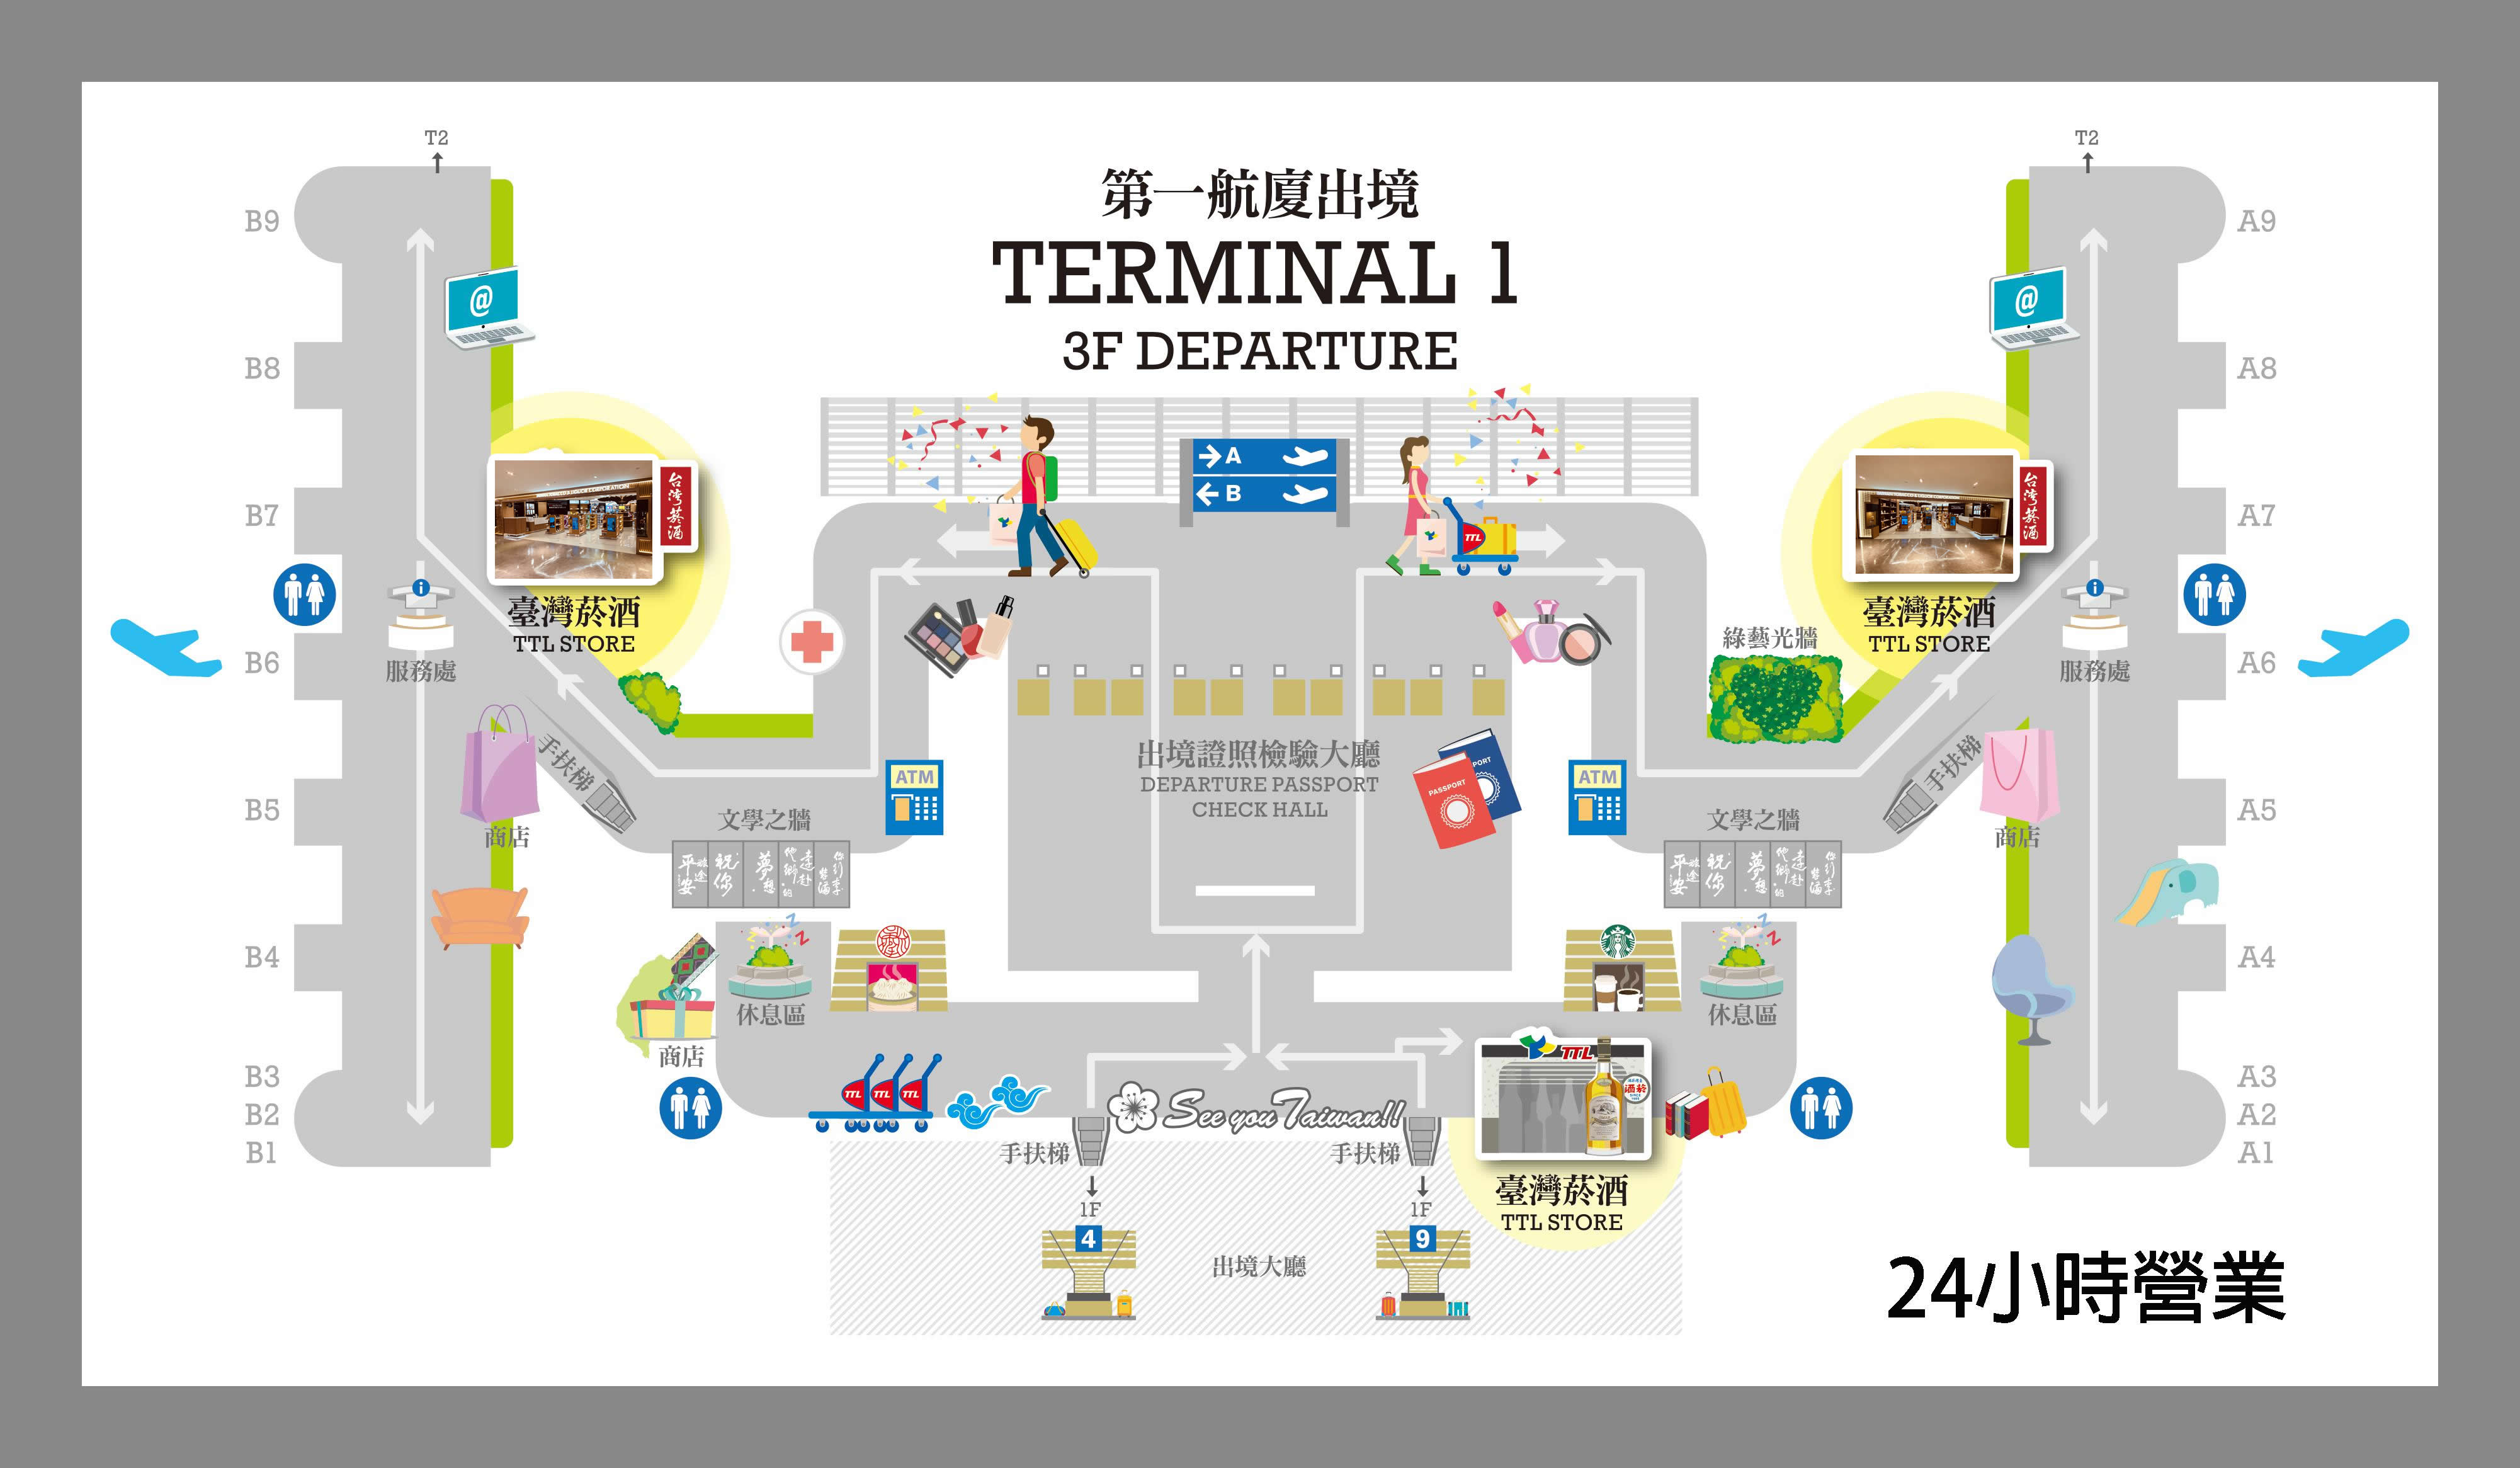 First terminal exit map